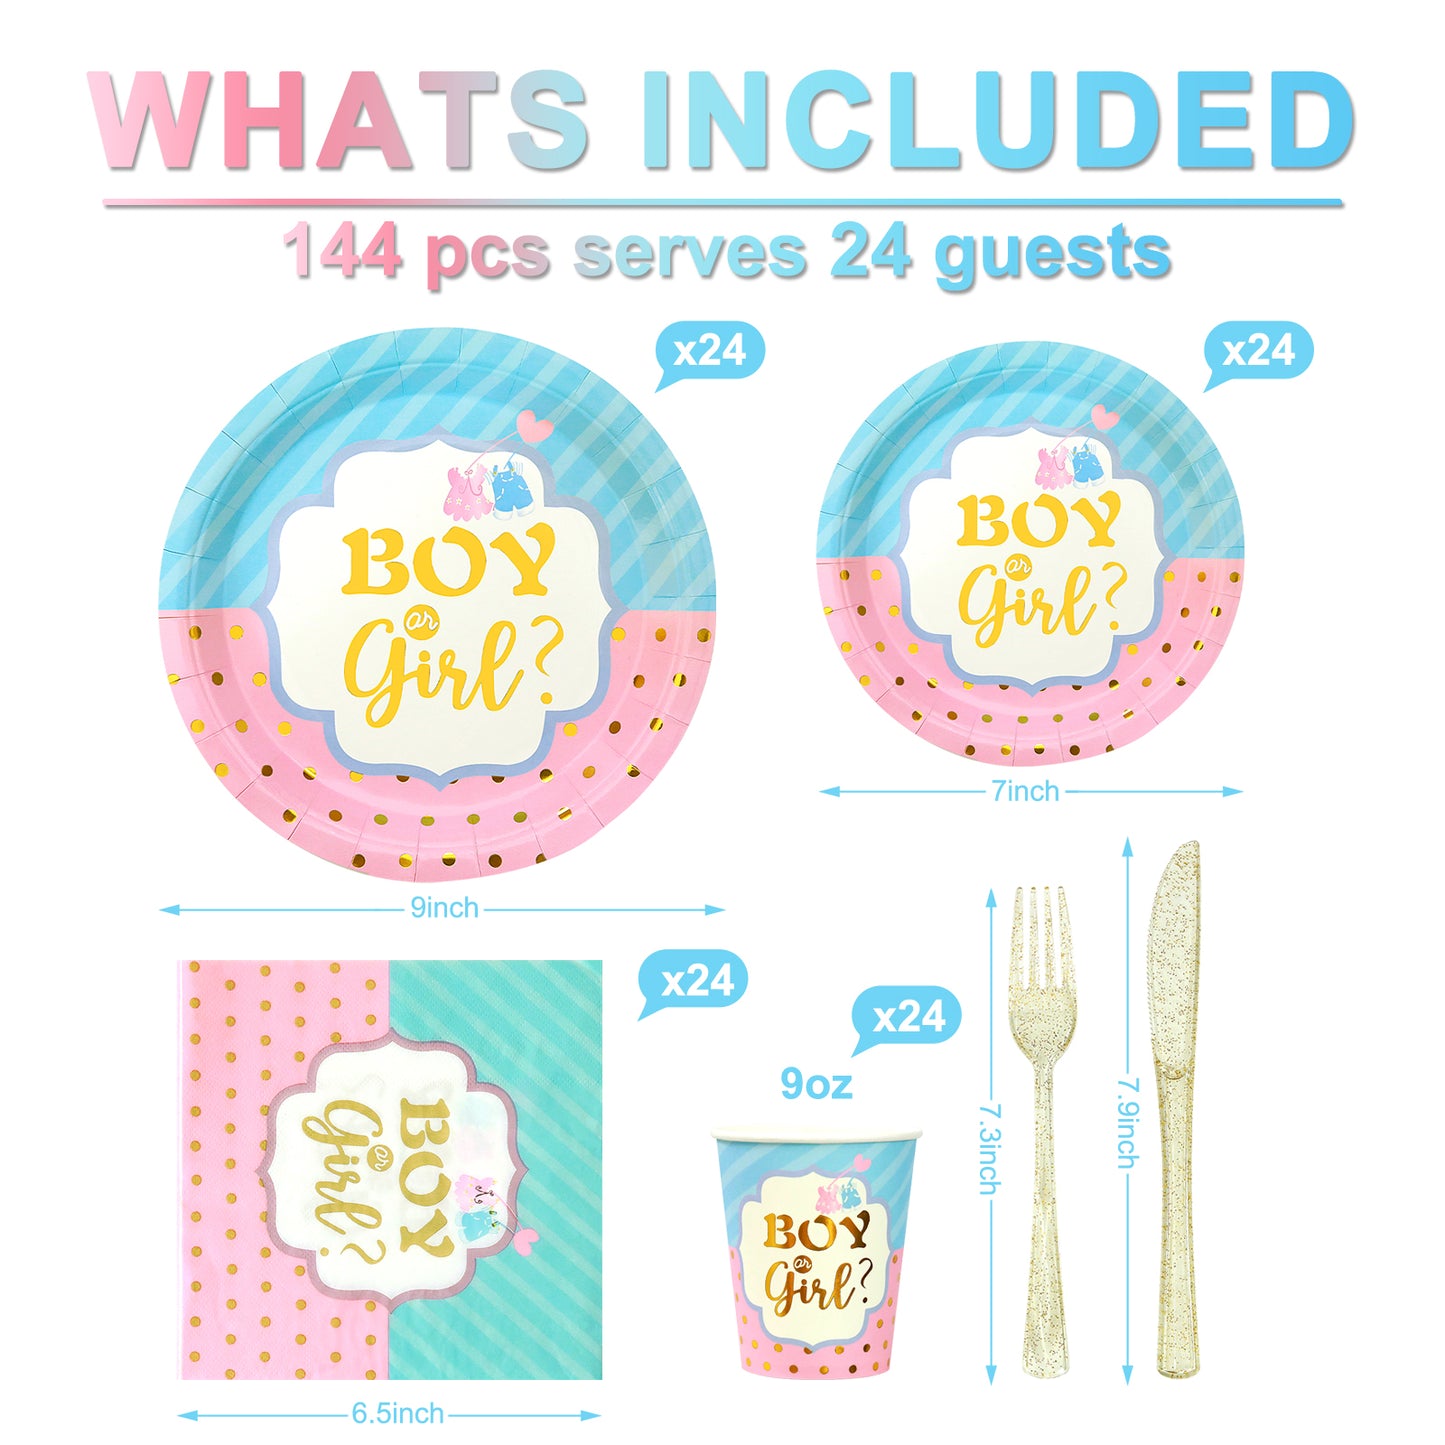 144PCS Gender Reveal Party Supplies, Blue and Pink Paper Plates and Napkins Baby Shower Tableware Set, Party Decorations for Boy or Girl, Serves 24